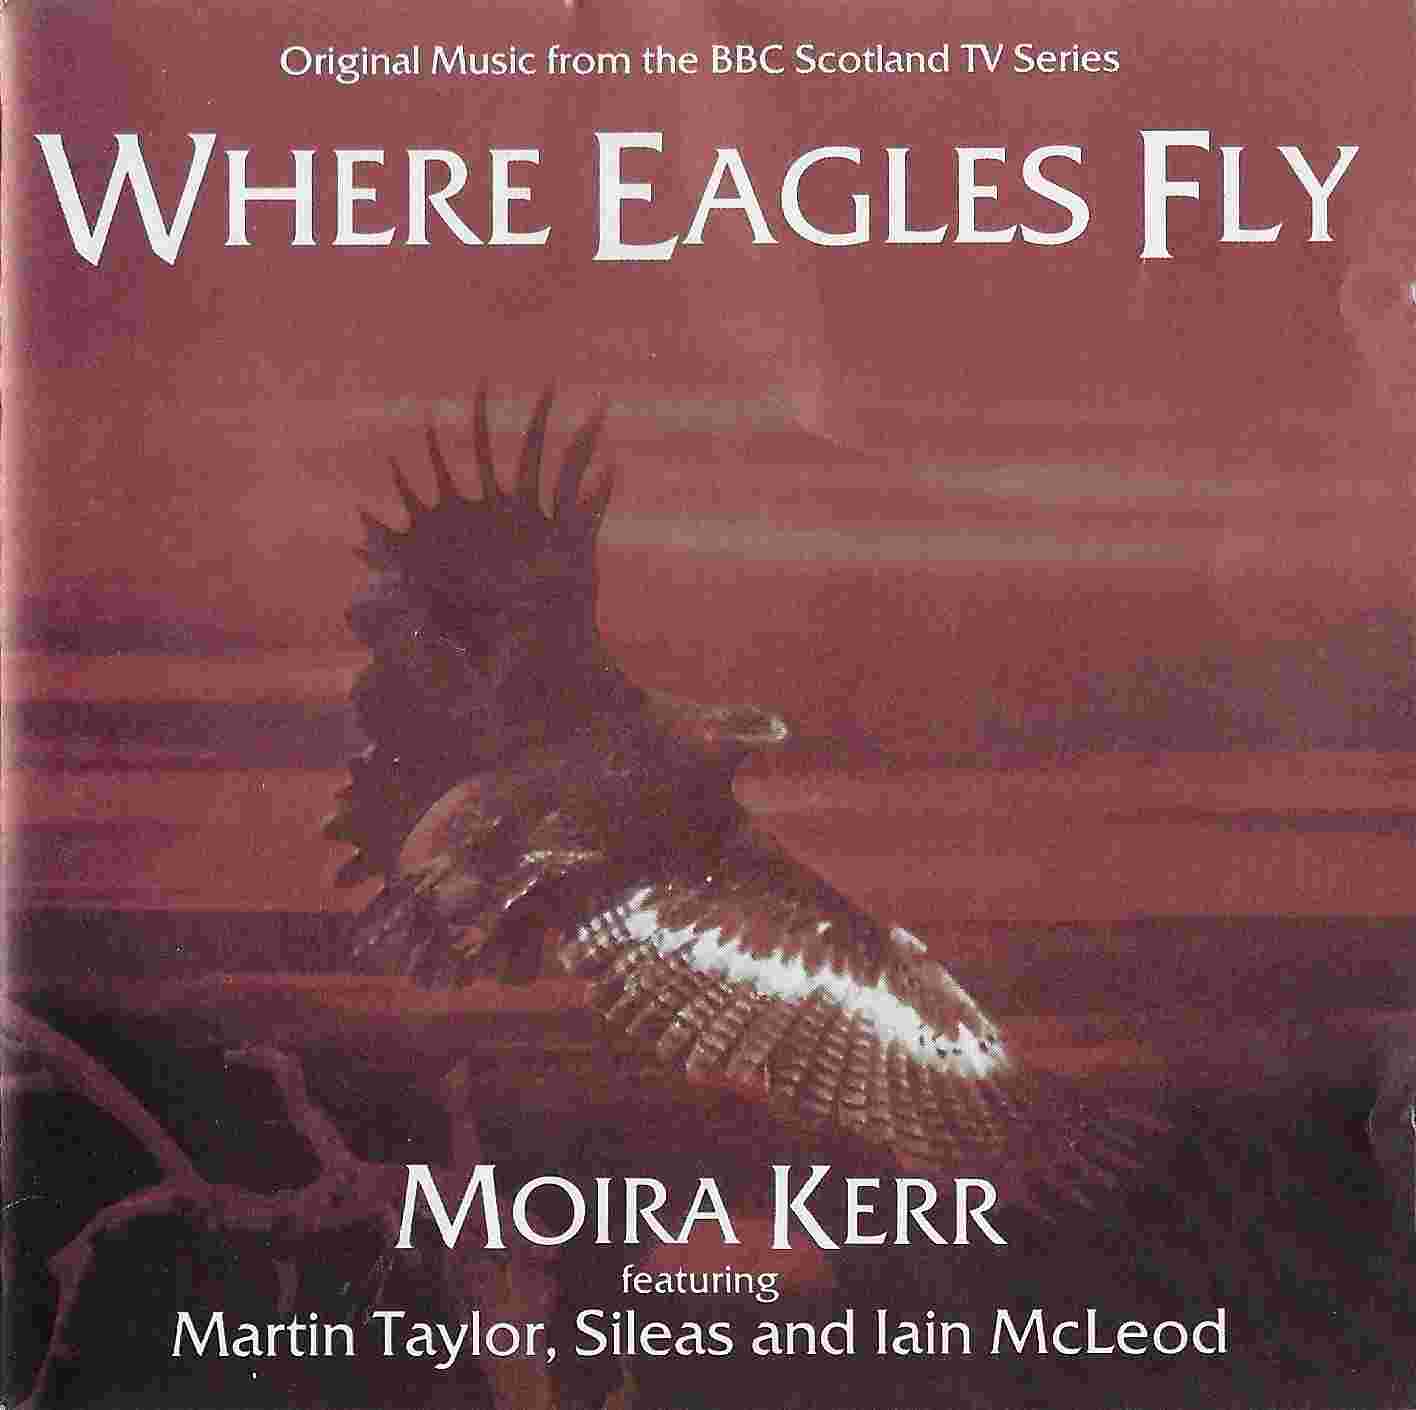 Picture of BBCCD771 Where eagles fly by artist Moira Kerr from the BBC cds - Records and Tapes library